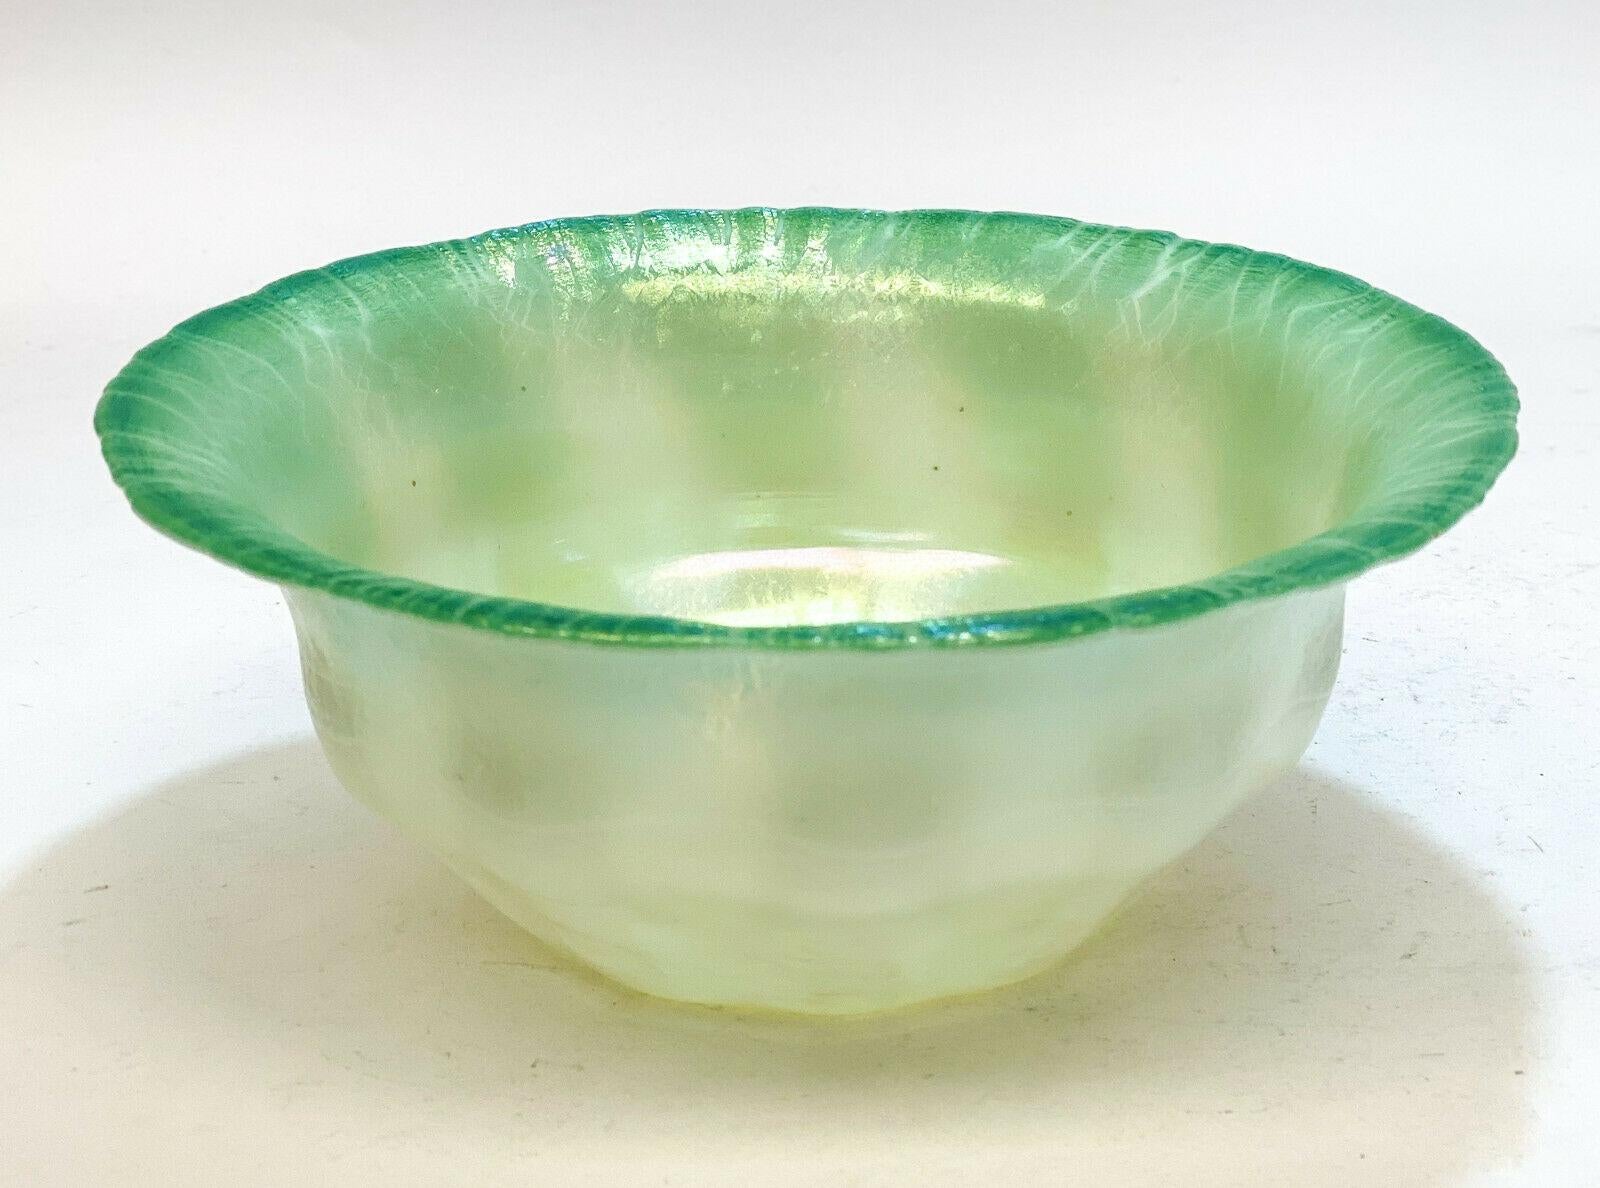 LCT Louis Comfort Tiffany & Co. art glass bowl, circa 1900. Scalloped rim with a green to yellow transition to the bowl. Marked LCT Tiffany to the underside. 

Weight approximate, 1 lb

Measures: Approximate, 8.5 inches diameter x 3.5 inches